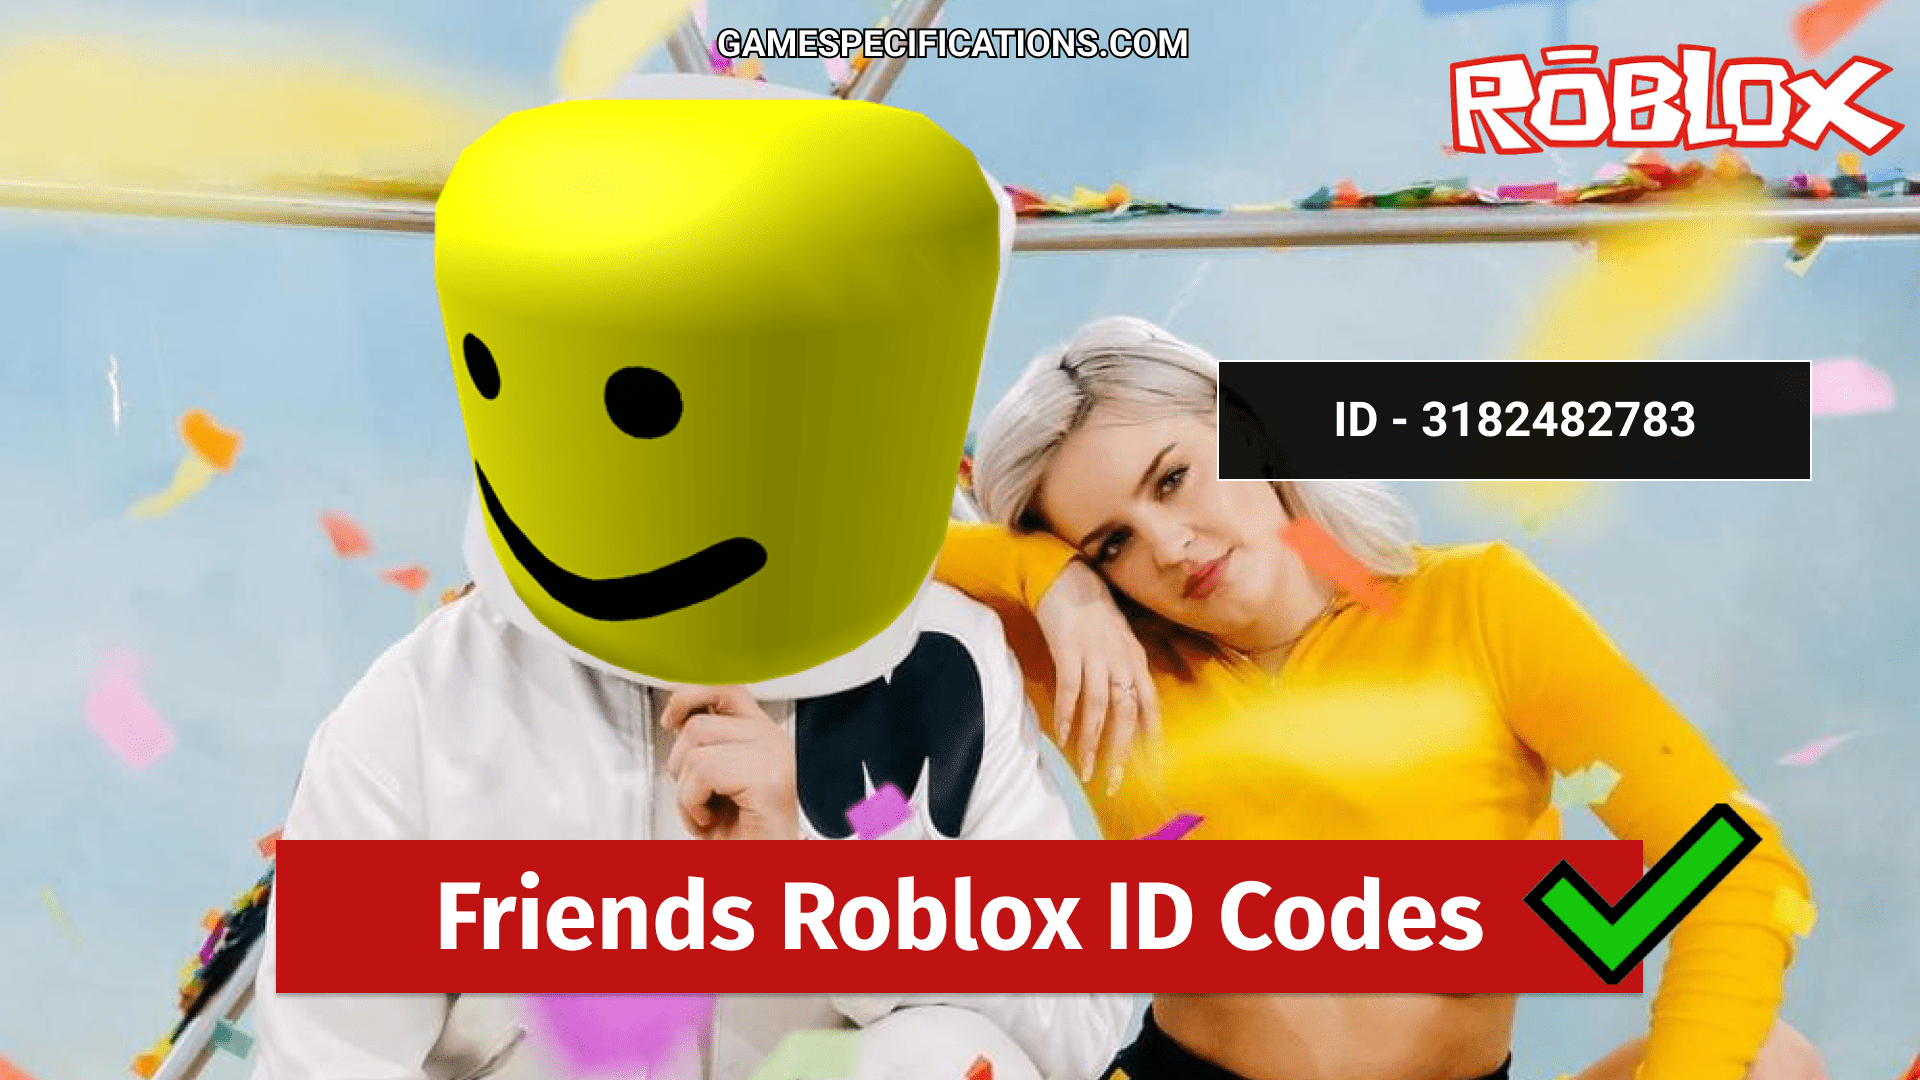 Friends Roblox Id Codes From Marshmello 2021 Game Specifications - roblox marshmello id